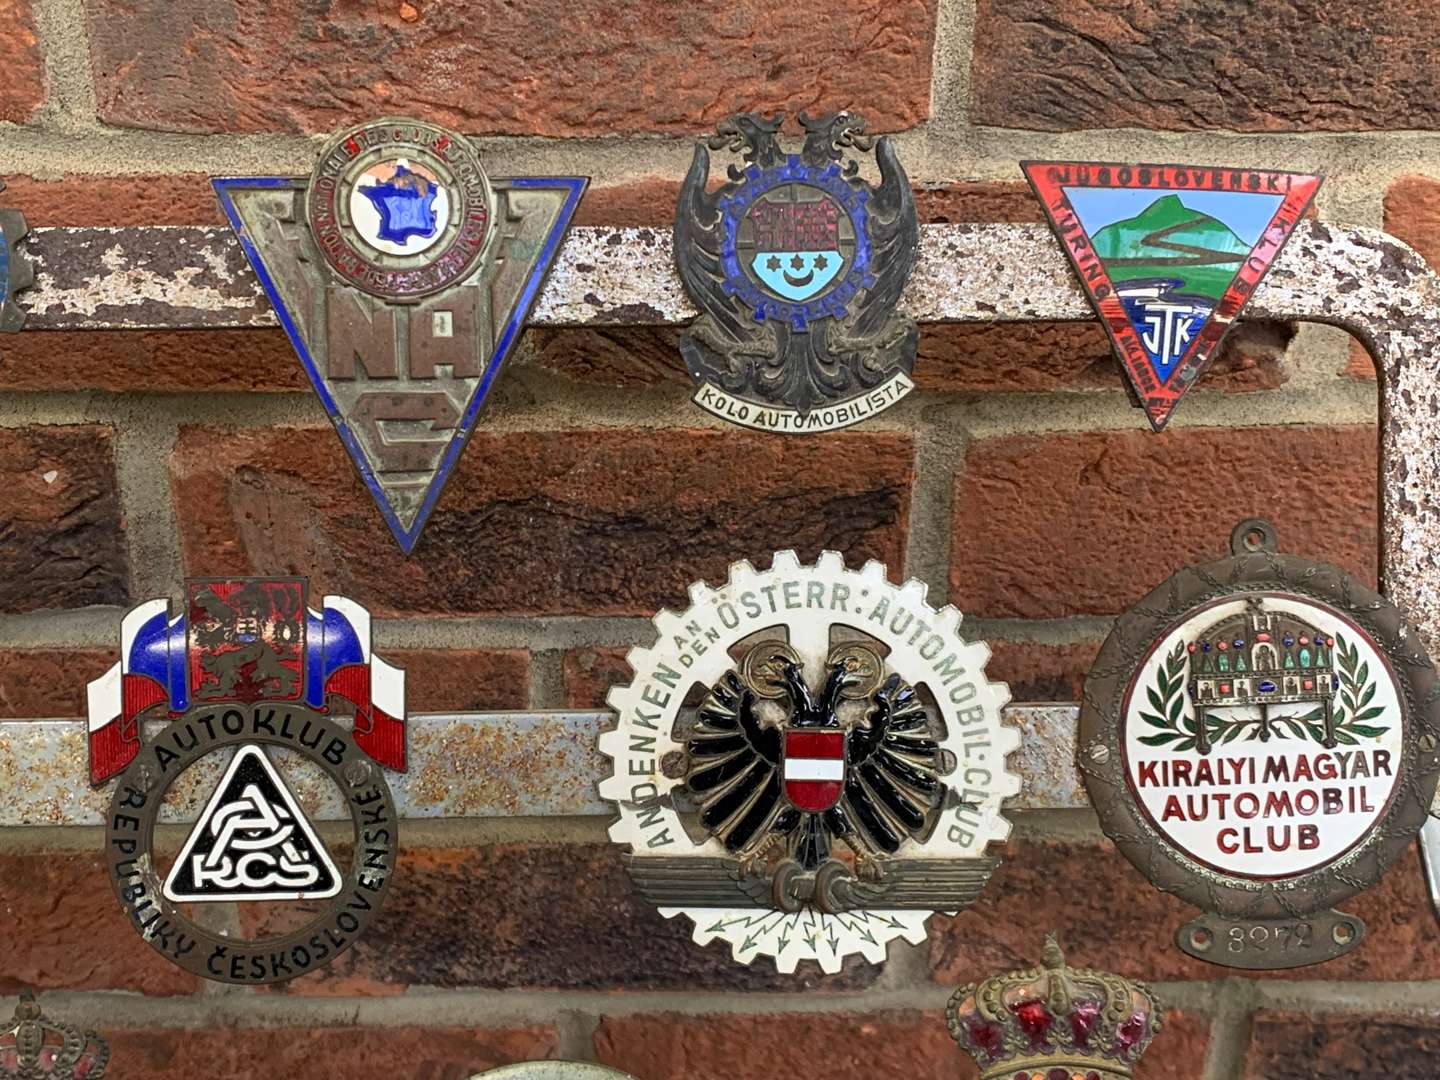 <p>A Significant Collection of Pre-War Badges on a Bar</p>